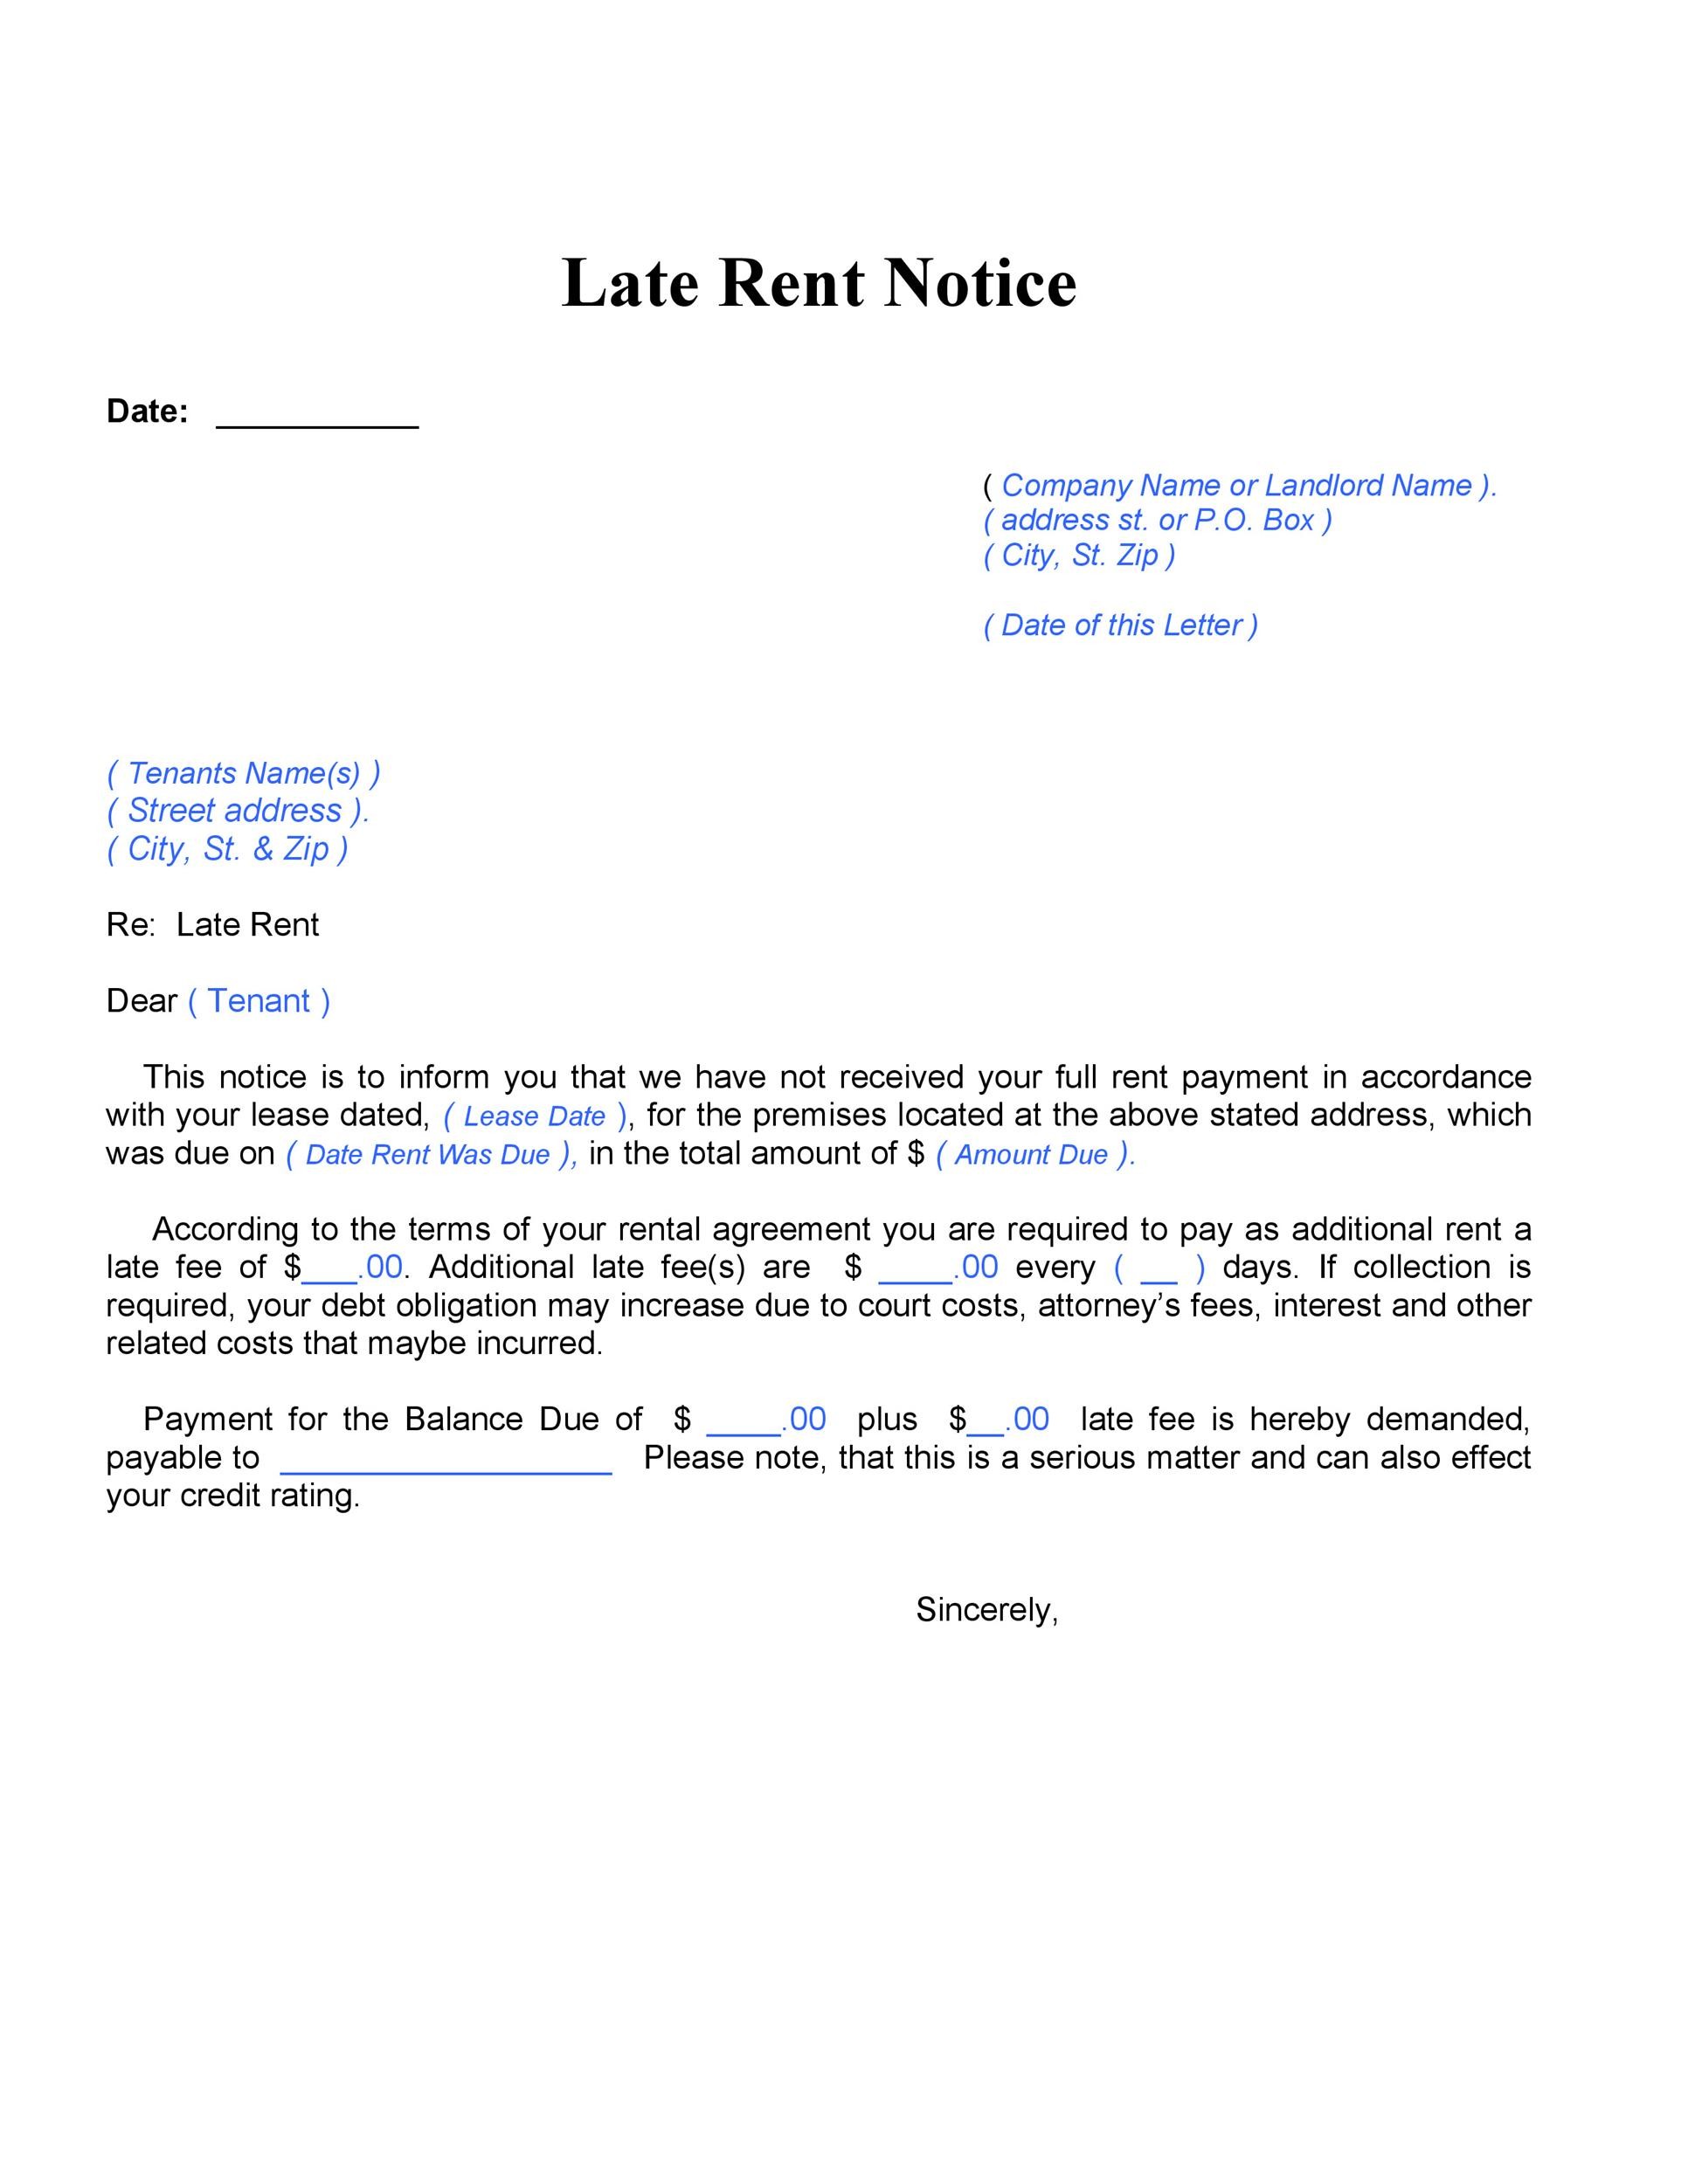 Late Fee For Rent Notice